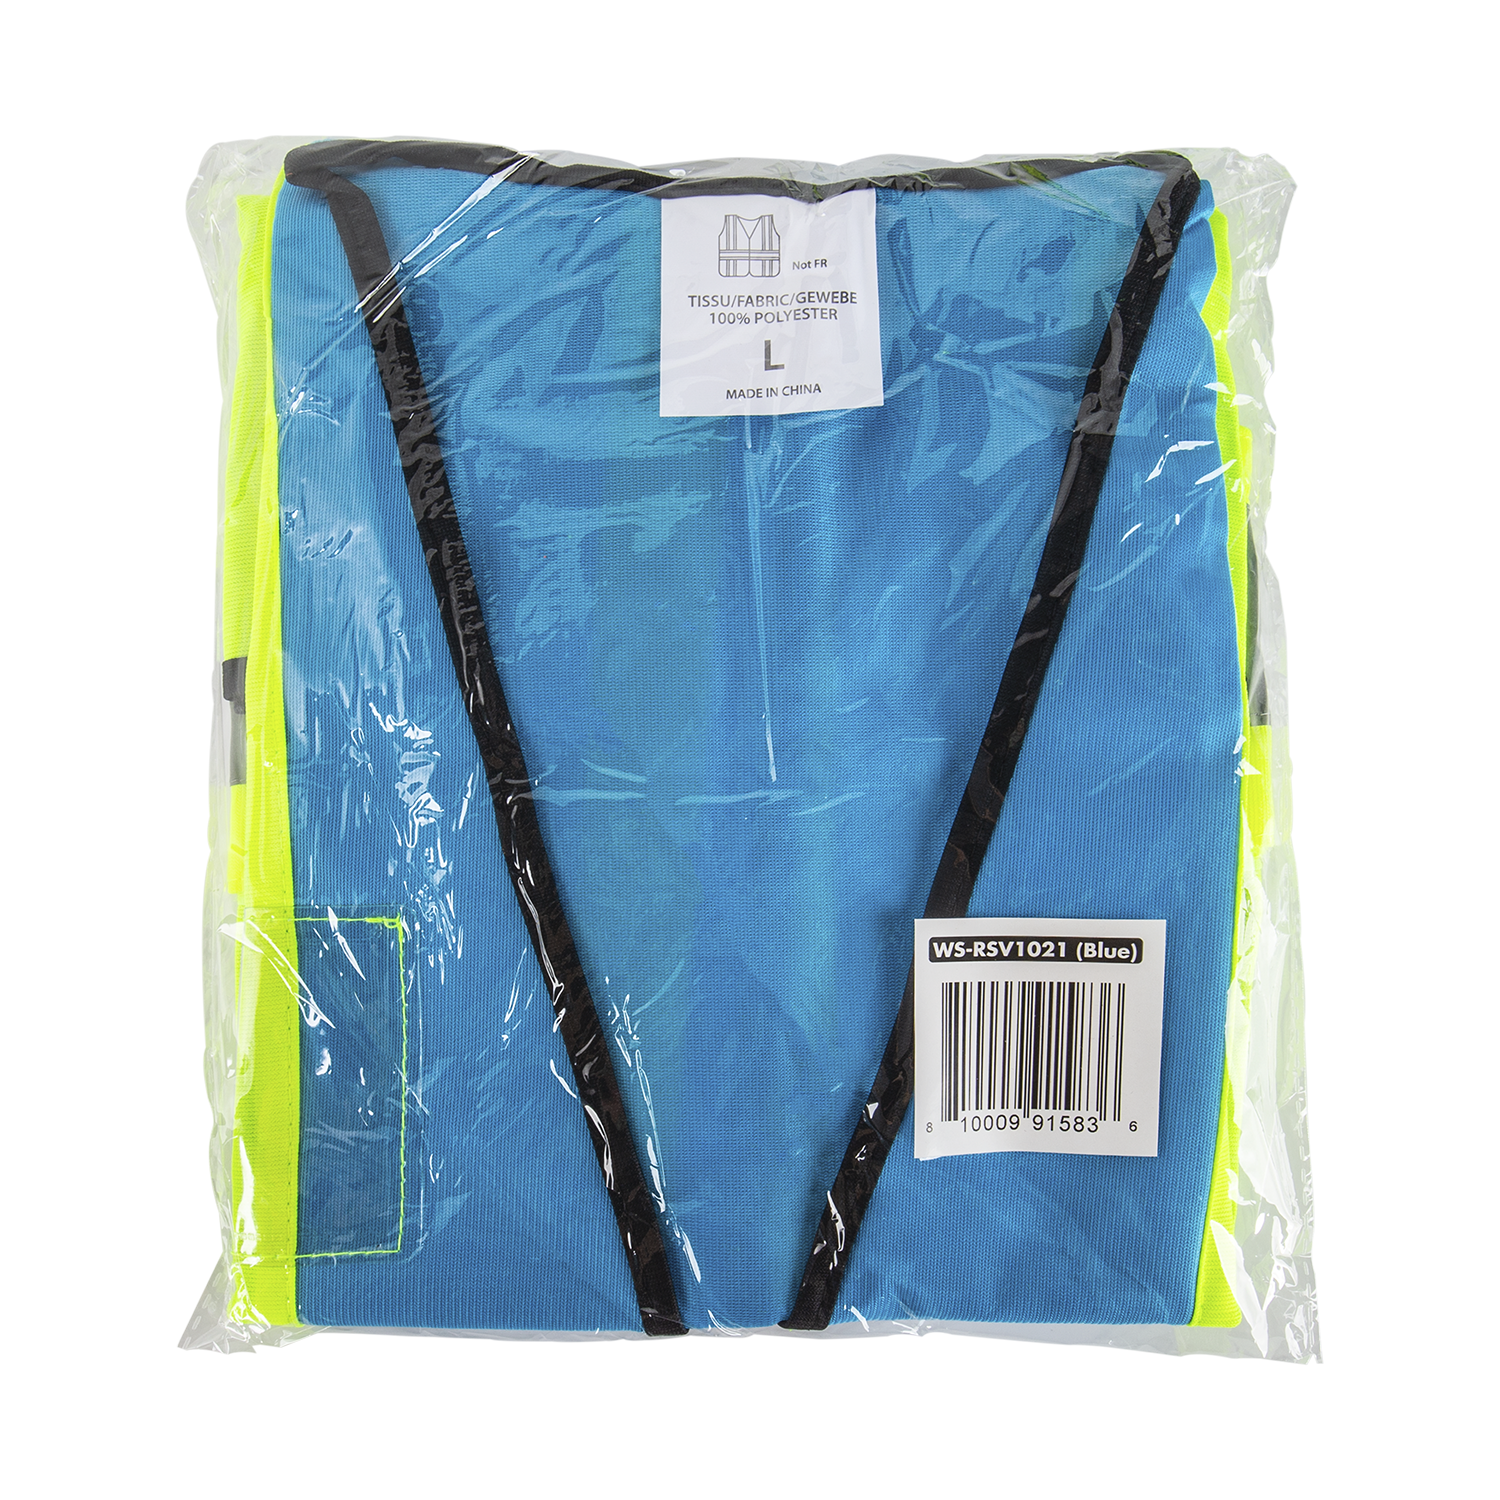 Karat High Visibility Reflective Safety Vest with Zipper Fastening (Blue), Large - 1 pc